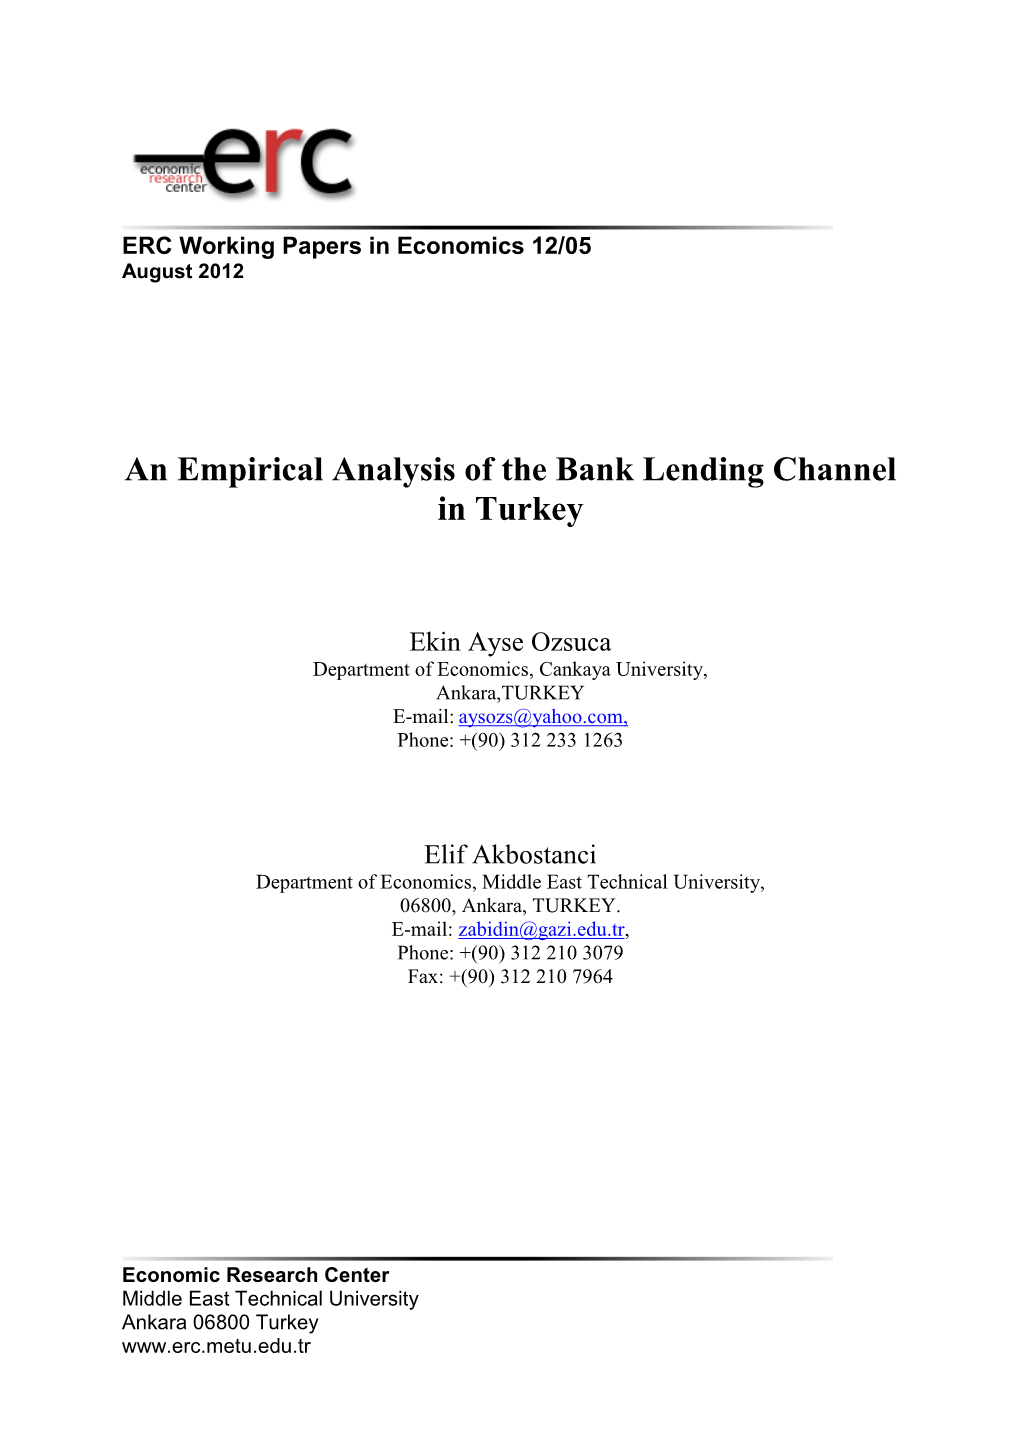 An Empirical Analysis of the Bank Lending Channel in Turkey